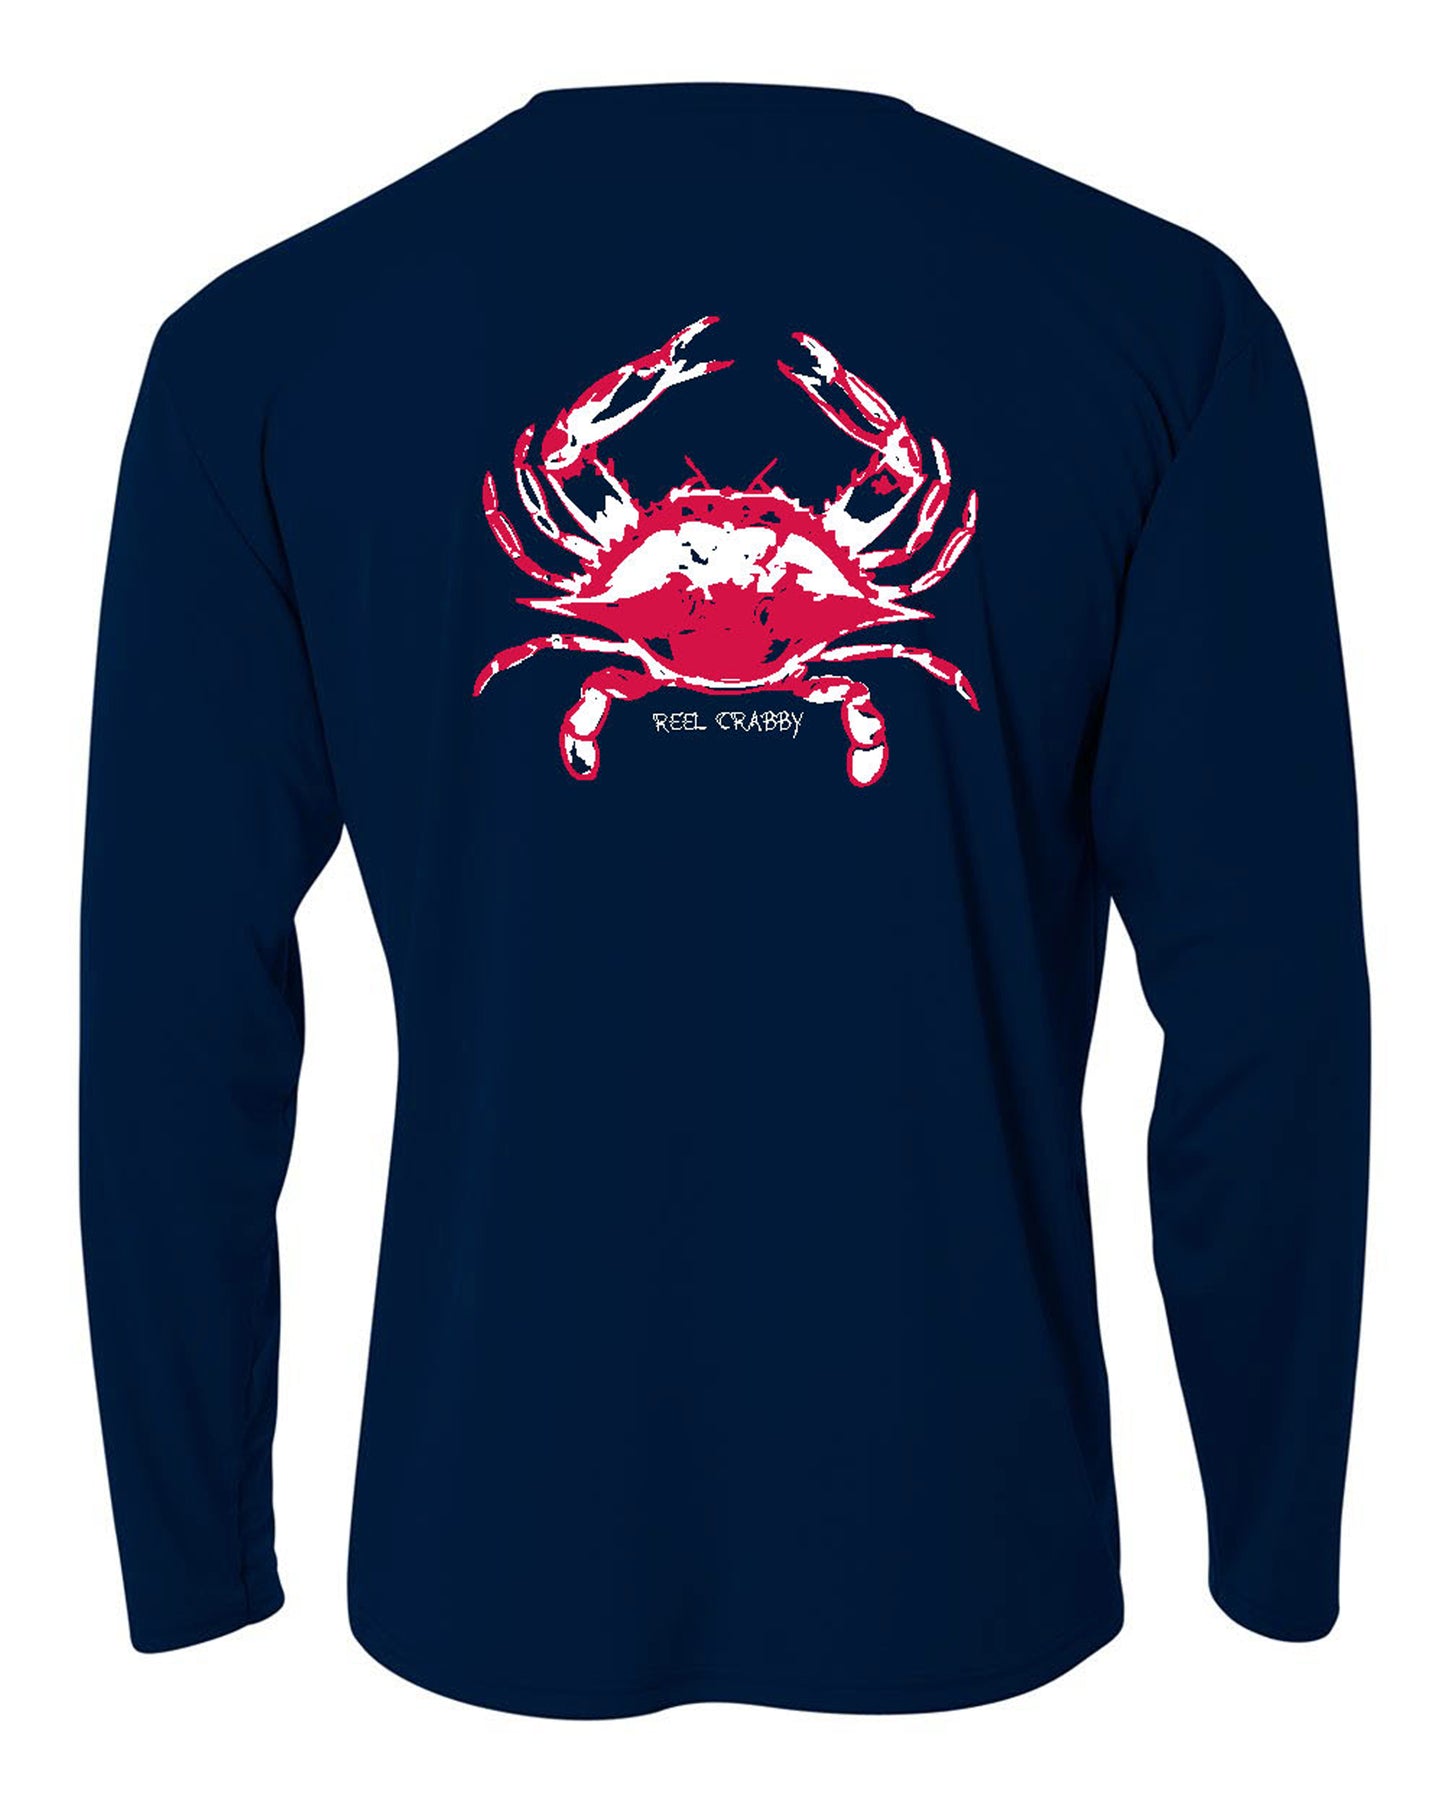 Navy Youth Crab "Reel Crabby" Long Sleeve Performance Dry-Fit Shirts with Sun Protection by Reel Fishy Apparel